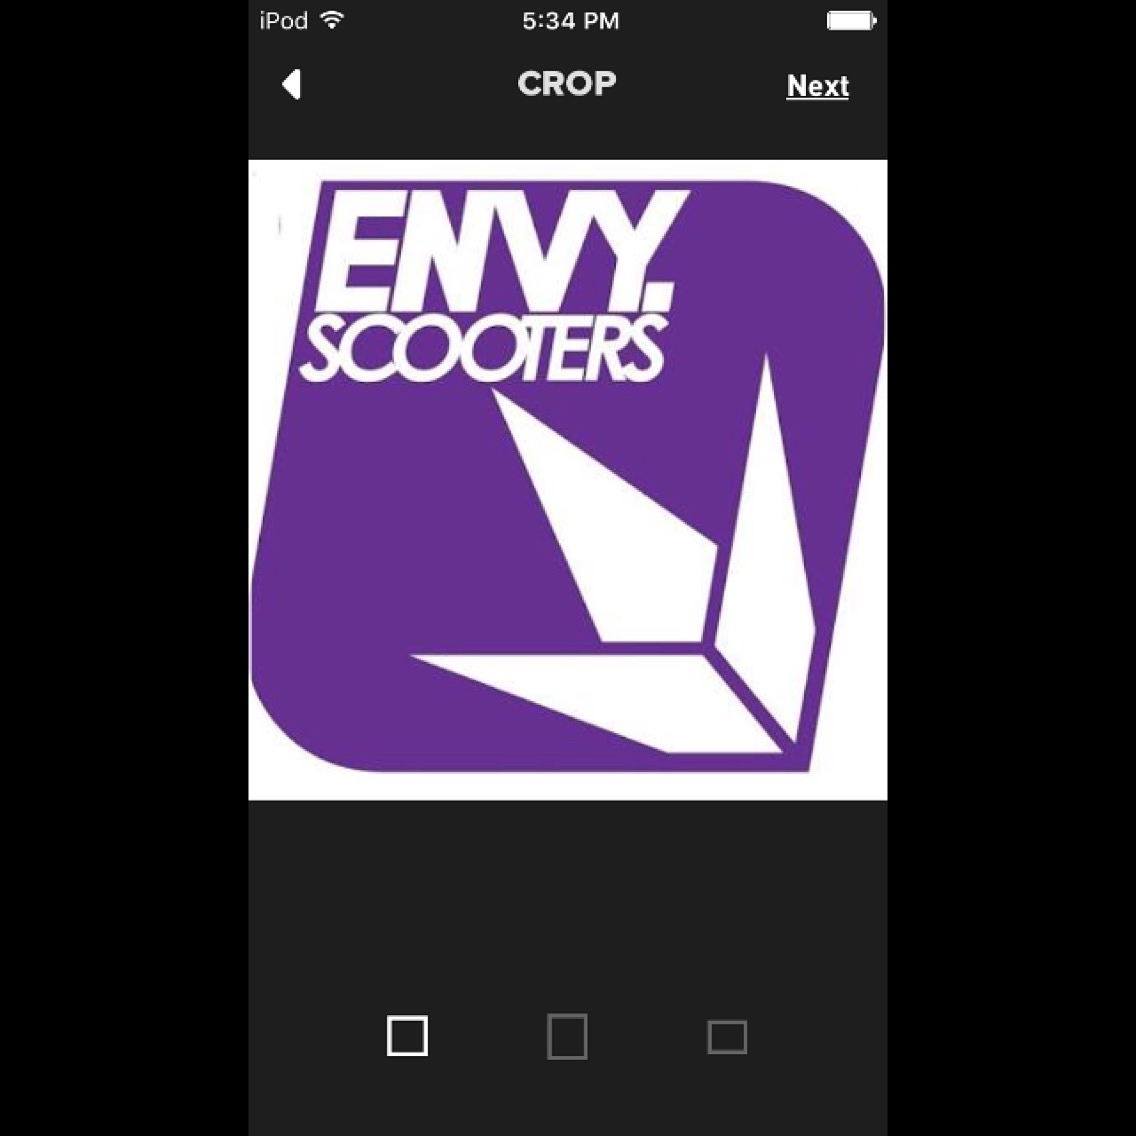 envy scooters wallpaper